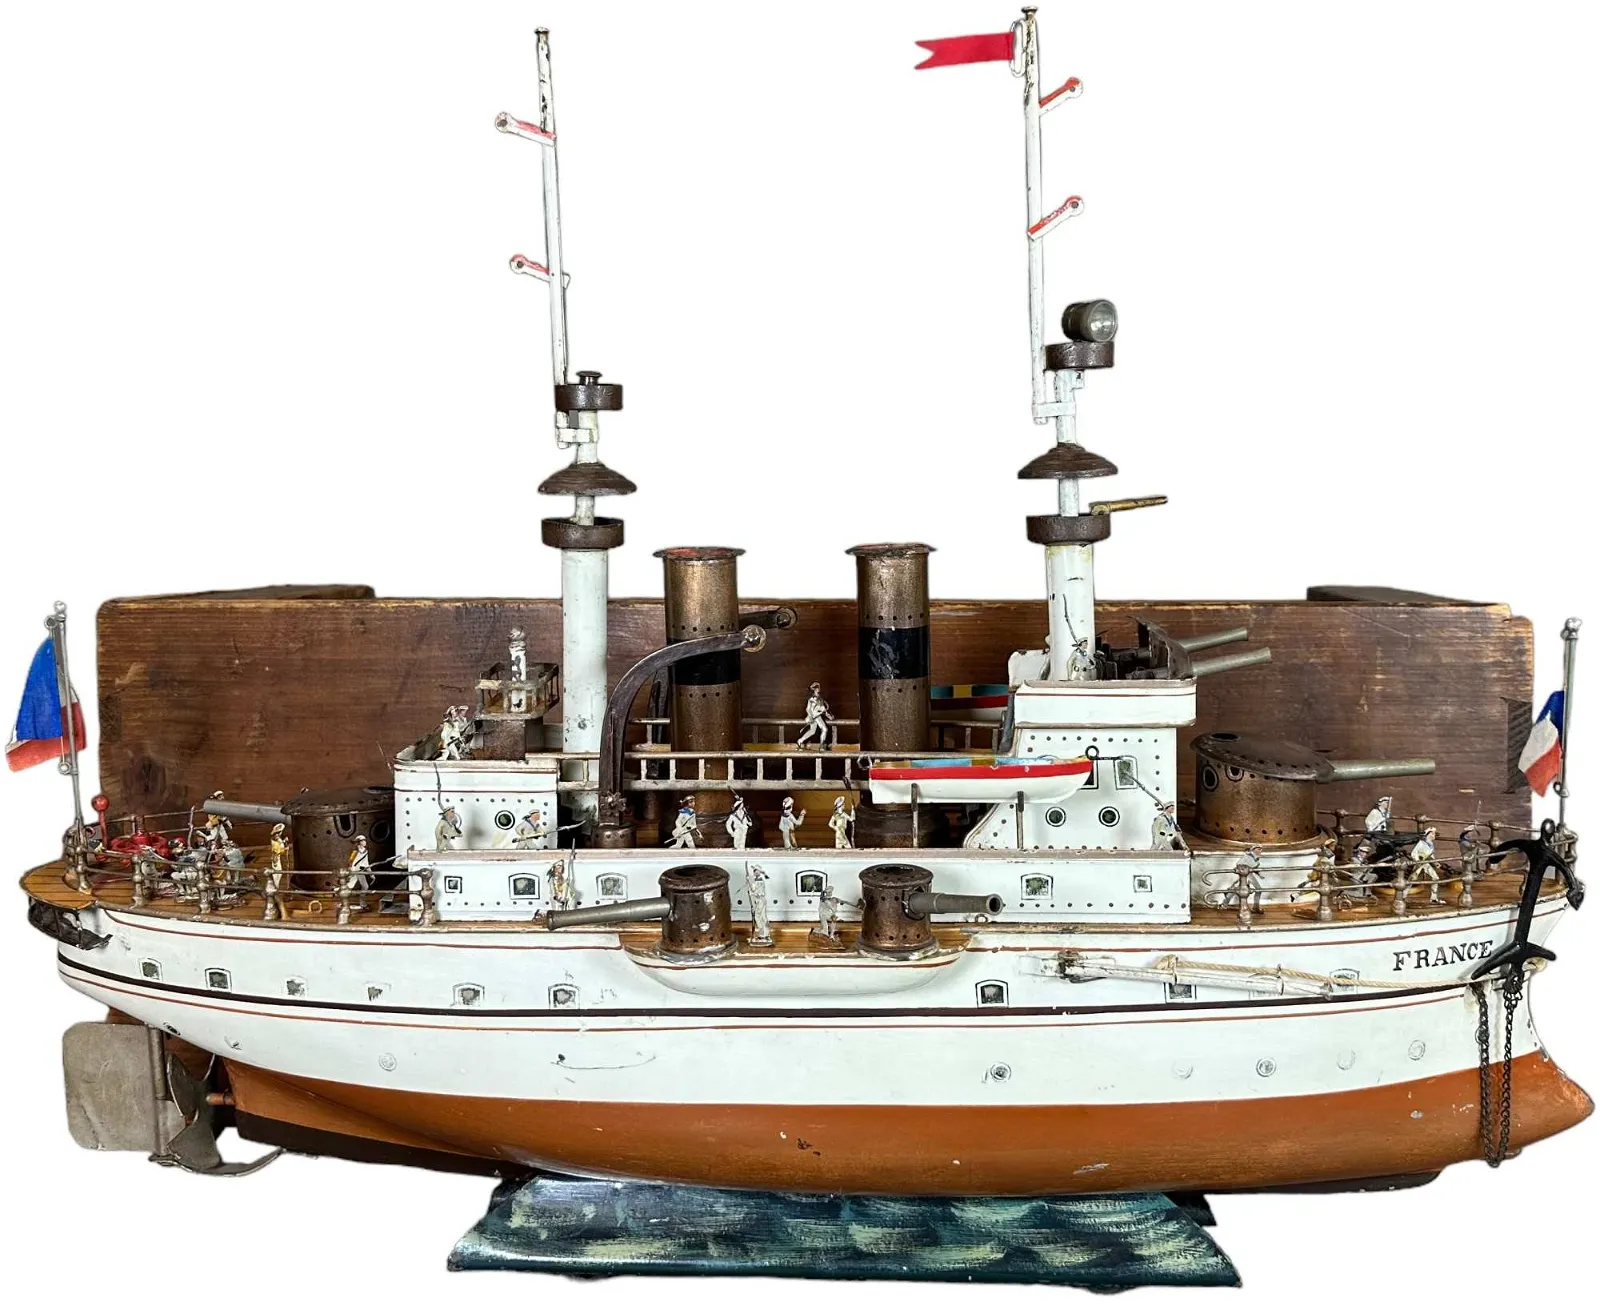 Marklin (Germany) clockwork ‘Battleship France,’ circa 1902-1907, with numerous cannons, lifeboats and masts. Retains original wood box/crate in which it was found together with (included) museum-quality lead sailor figures in like-new condition. Book example featured on Page 200 in David Pressland’s ‘Great Book of Tin Toys.’ Near-mint condition. Sold at upper end of estimate for $78,000